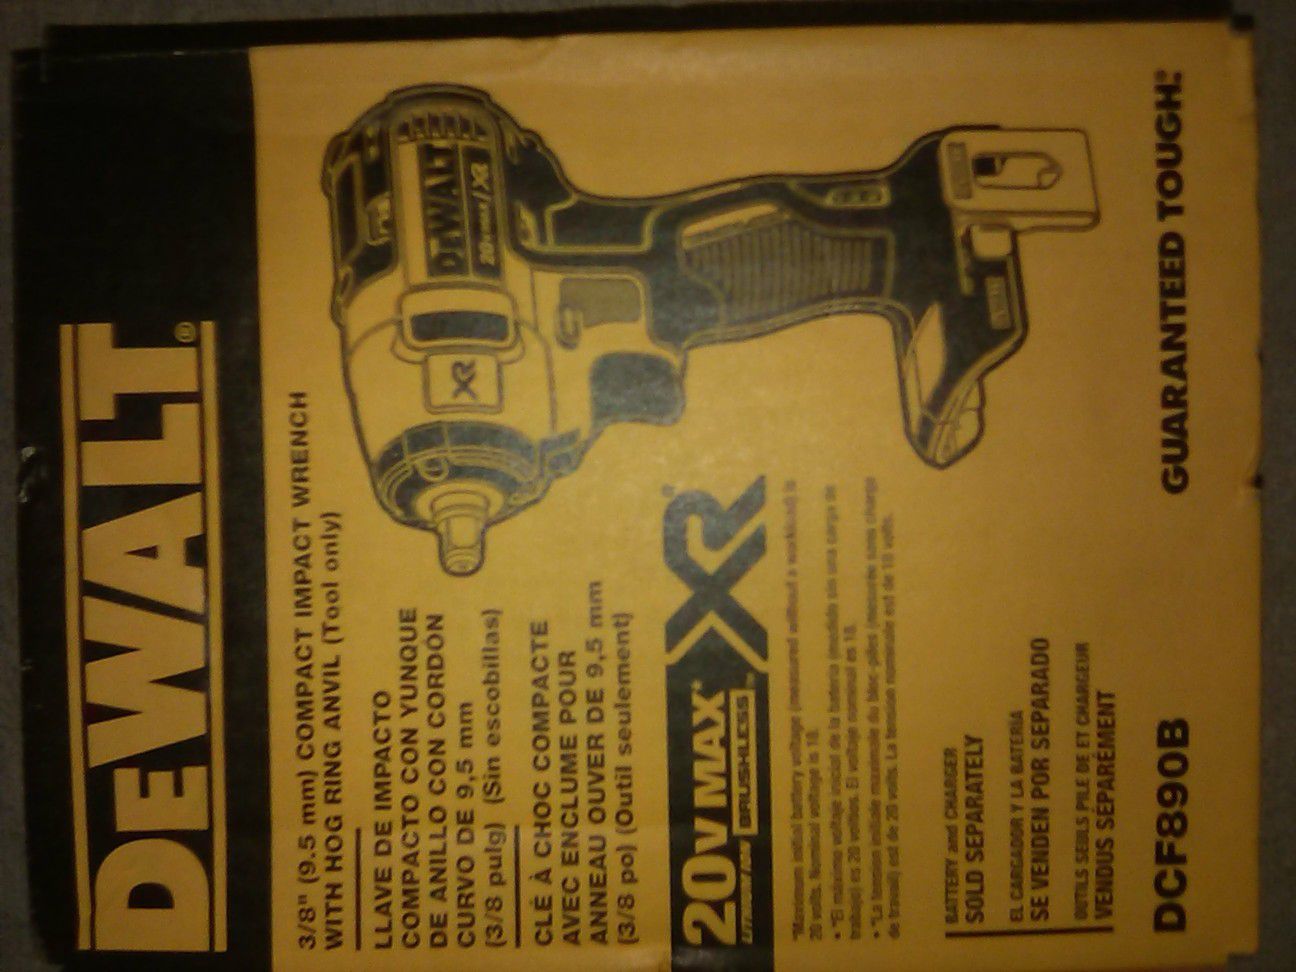 DEWALT 20V BRUSHLESS XR 3/8" COMPACT IMPACT WRENCH WITH HOG RING ANVIL, (DCF890B), BRAND NEW IN BOX